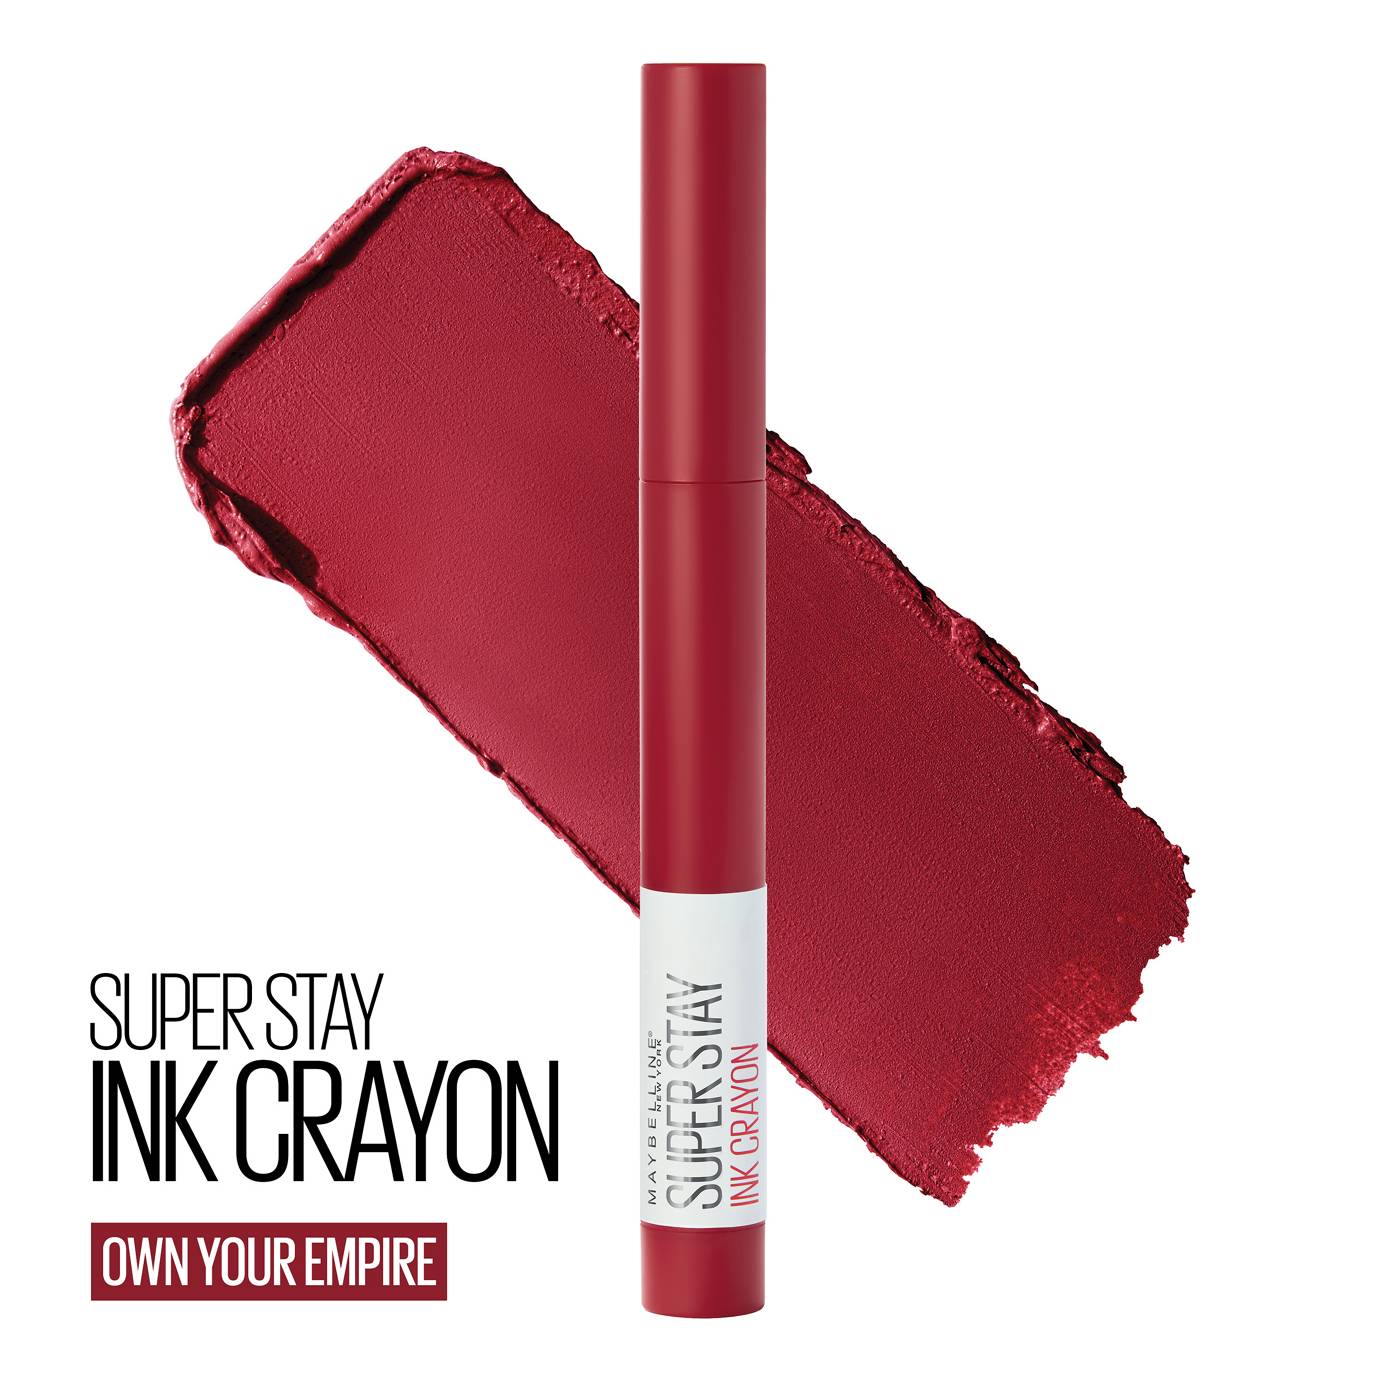 Maybelline Super Stay Ink Crayon Lipstick Your Empire; image 3 of 5